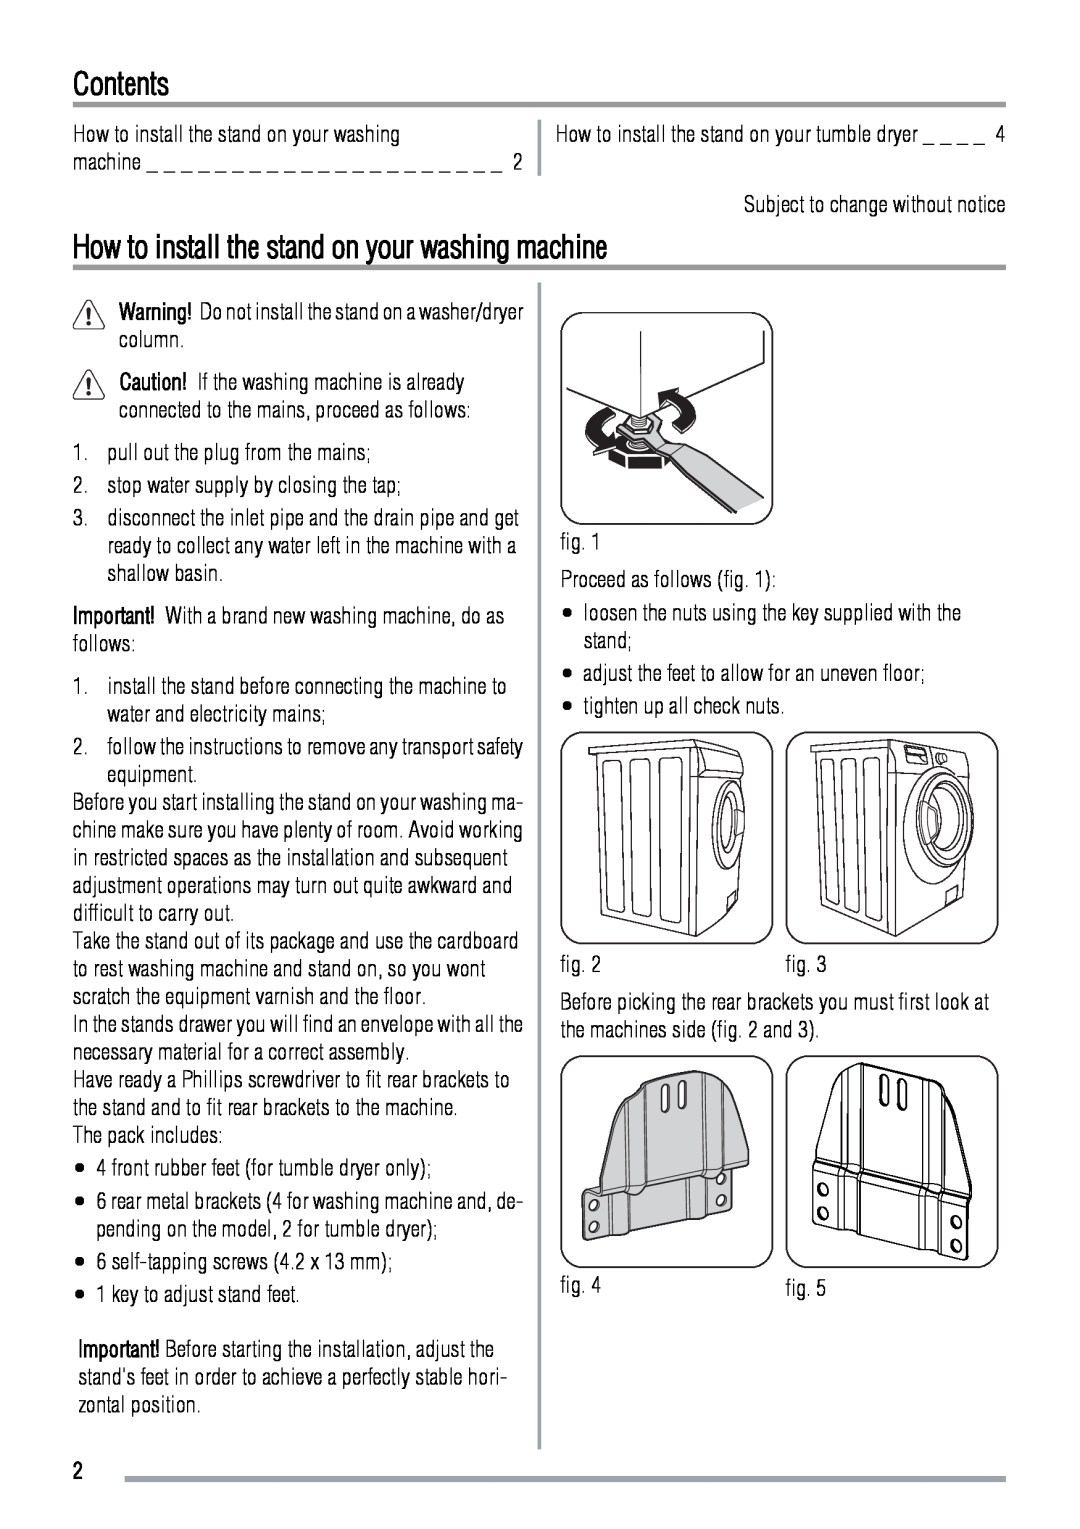 Zanussi Washer/Dryer user manual Contents, How to install the stand on your washing machine 